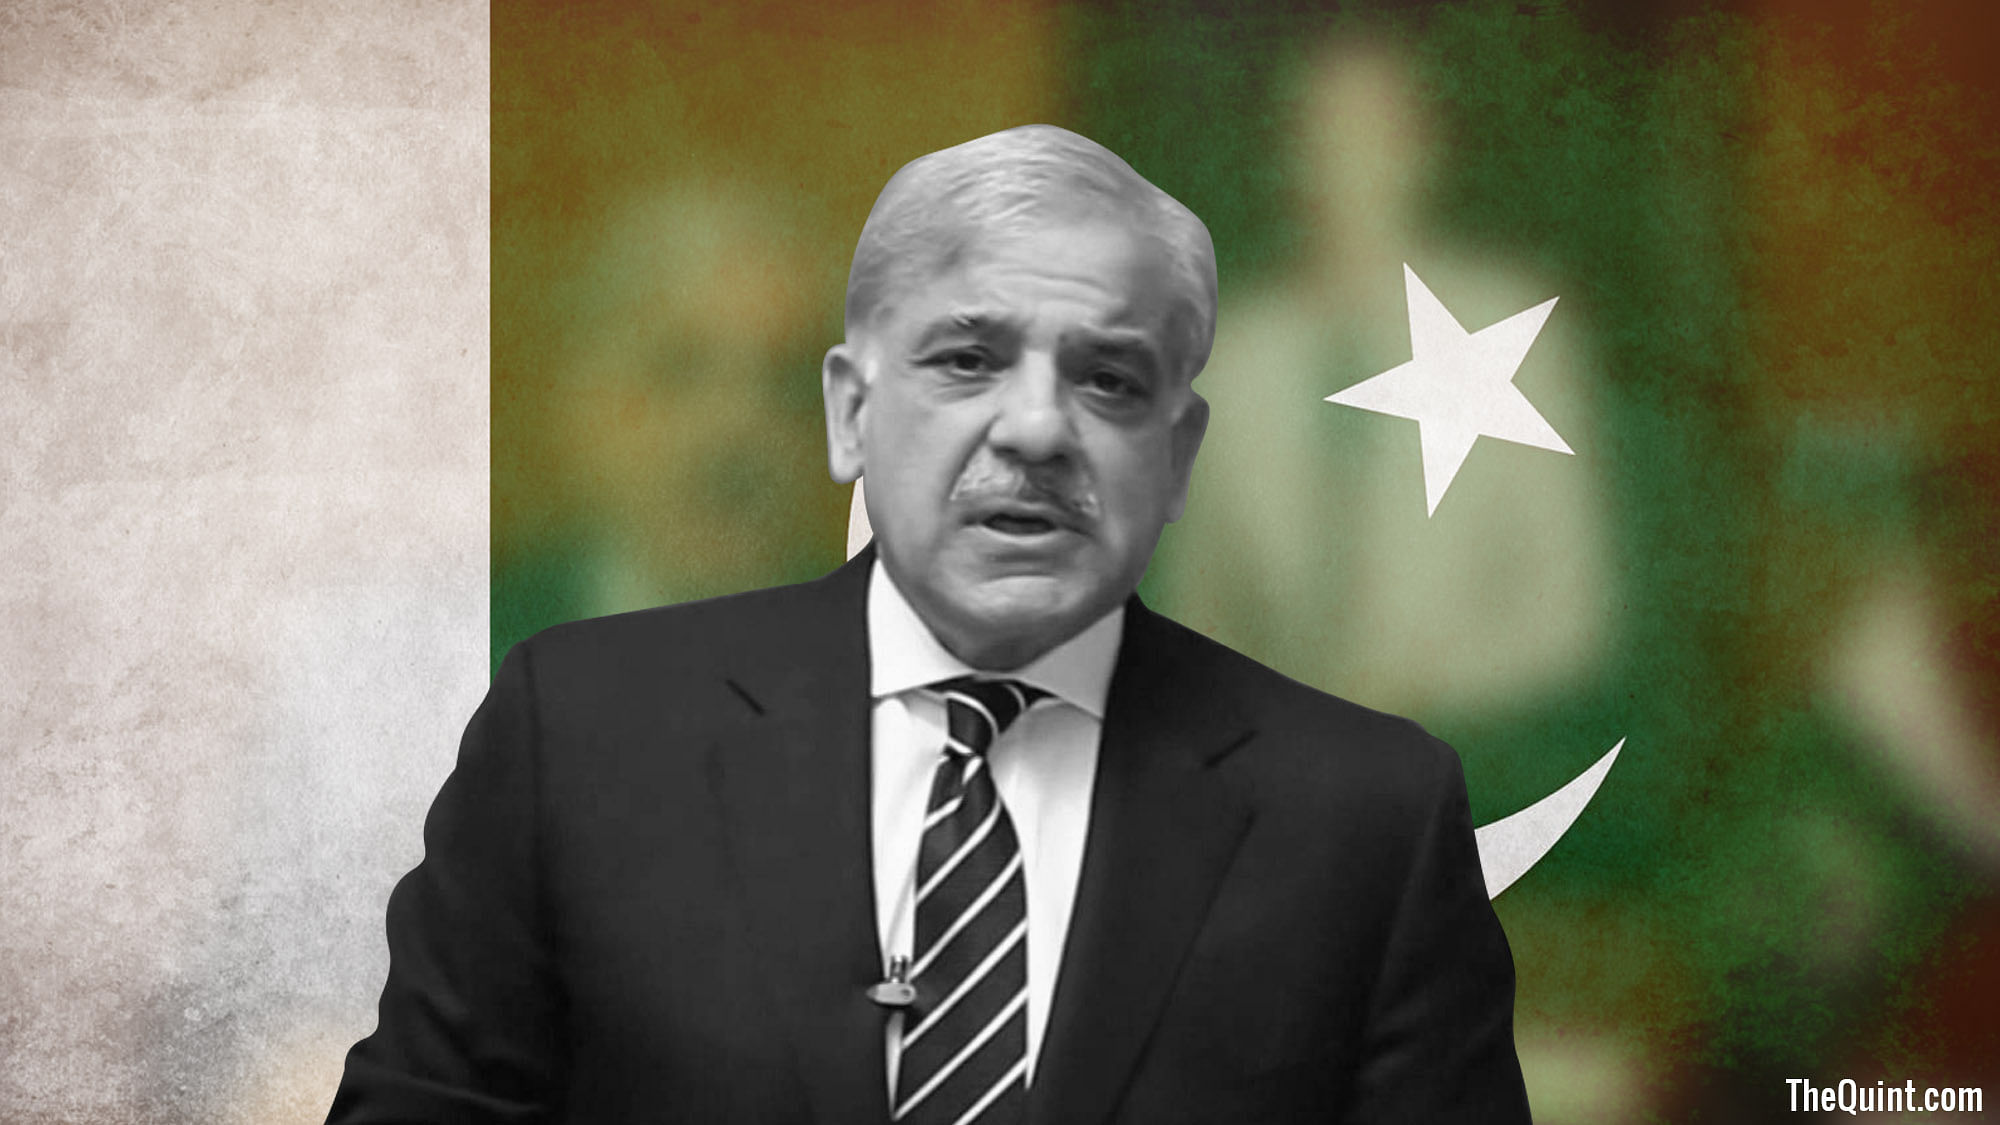 Nawaz Sharif chose his younger brother, and Punjab Chief Minister, Shahbaz Sharif as his successor on 29 July.